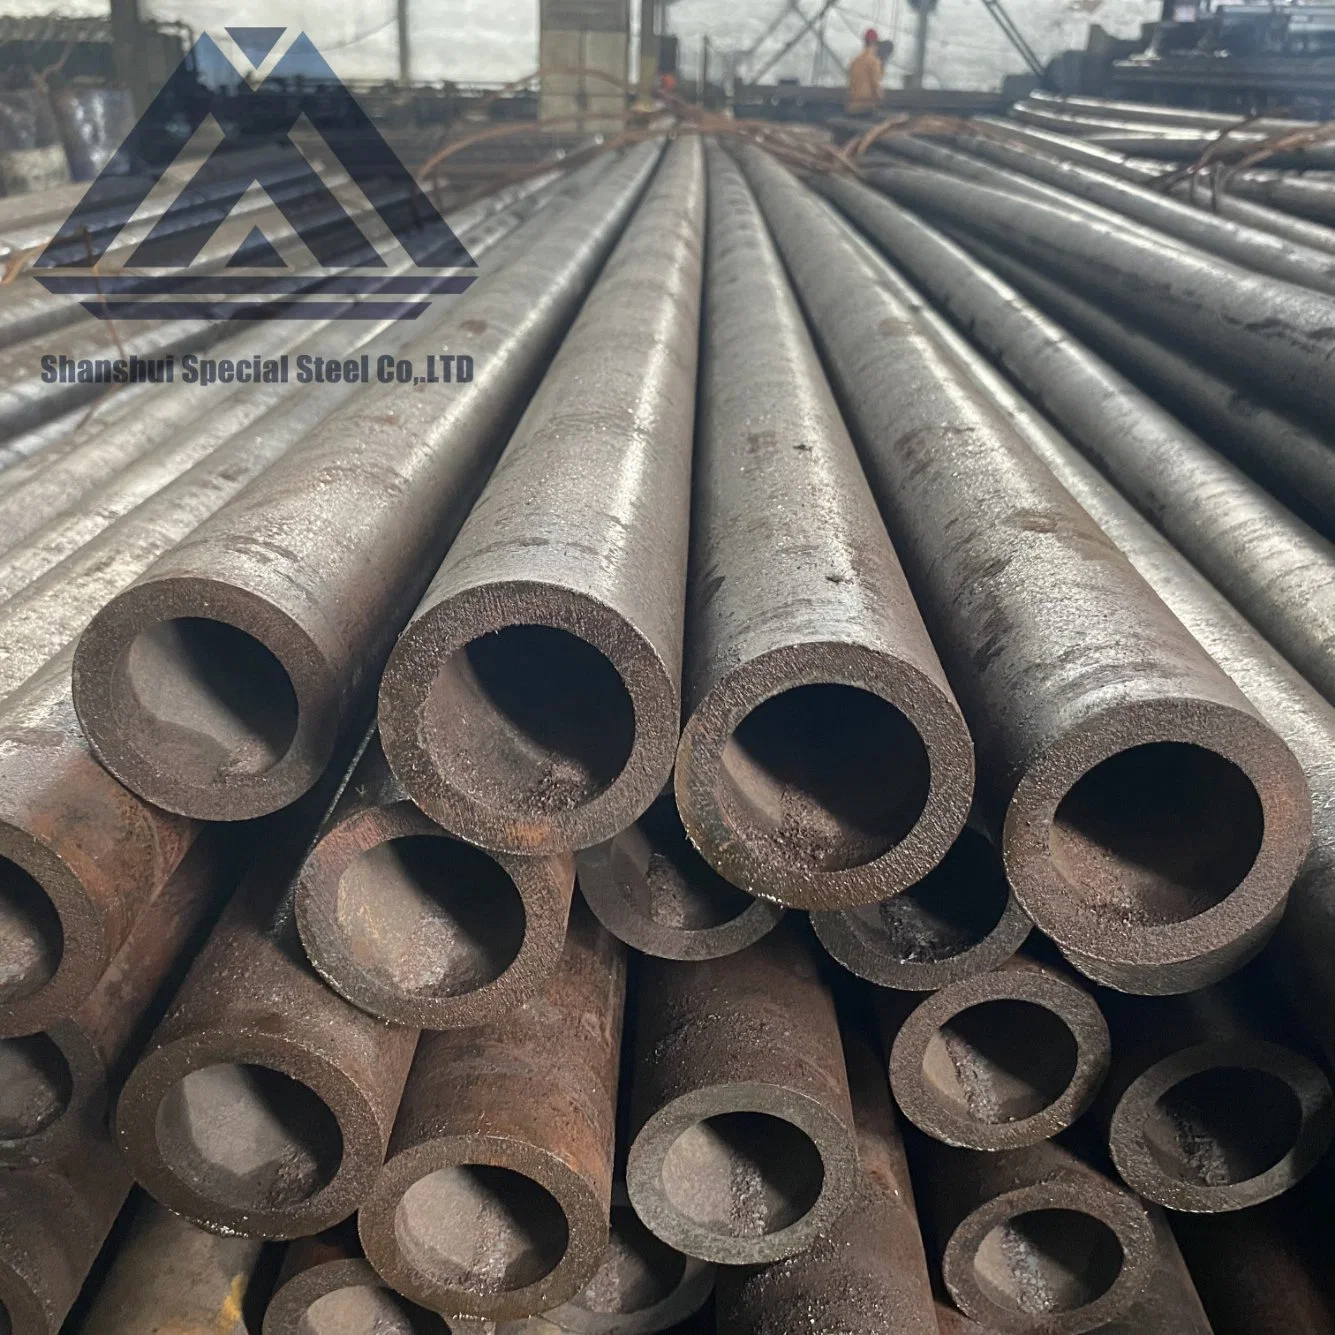 ASME SA / ASTM A333 Gr. 6 Carbon Steel Pipes on Low Temperature Application